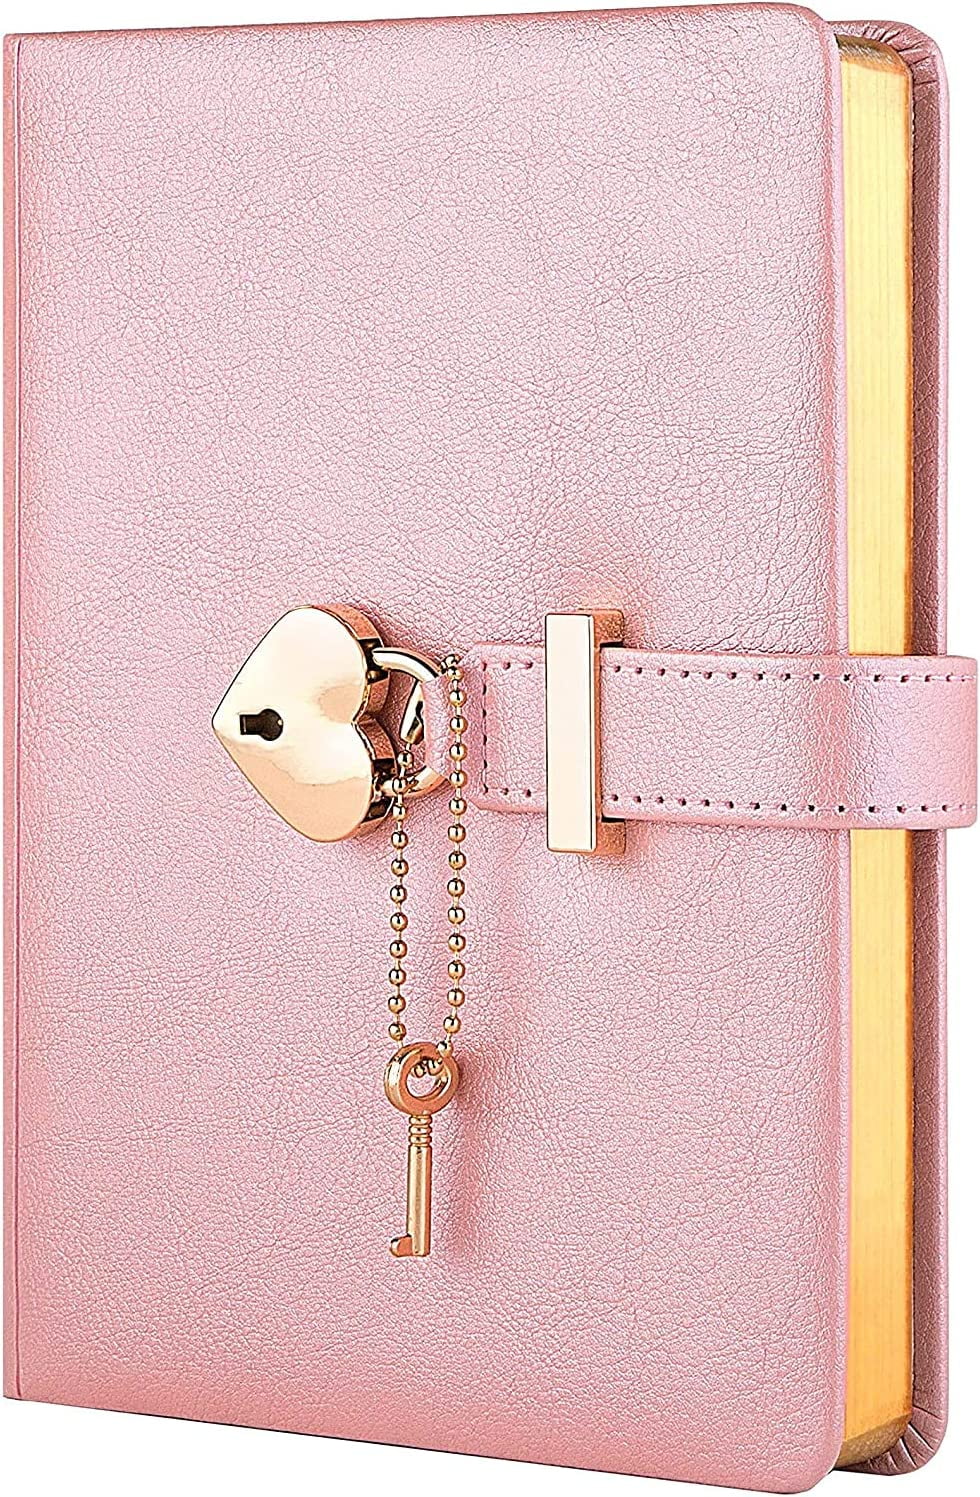 Poshieca Heart Shaped Lock Diary With Key Pu Leather Cover Journal Personal Organizers Secret